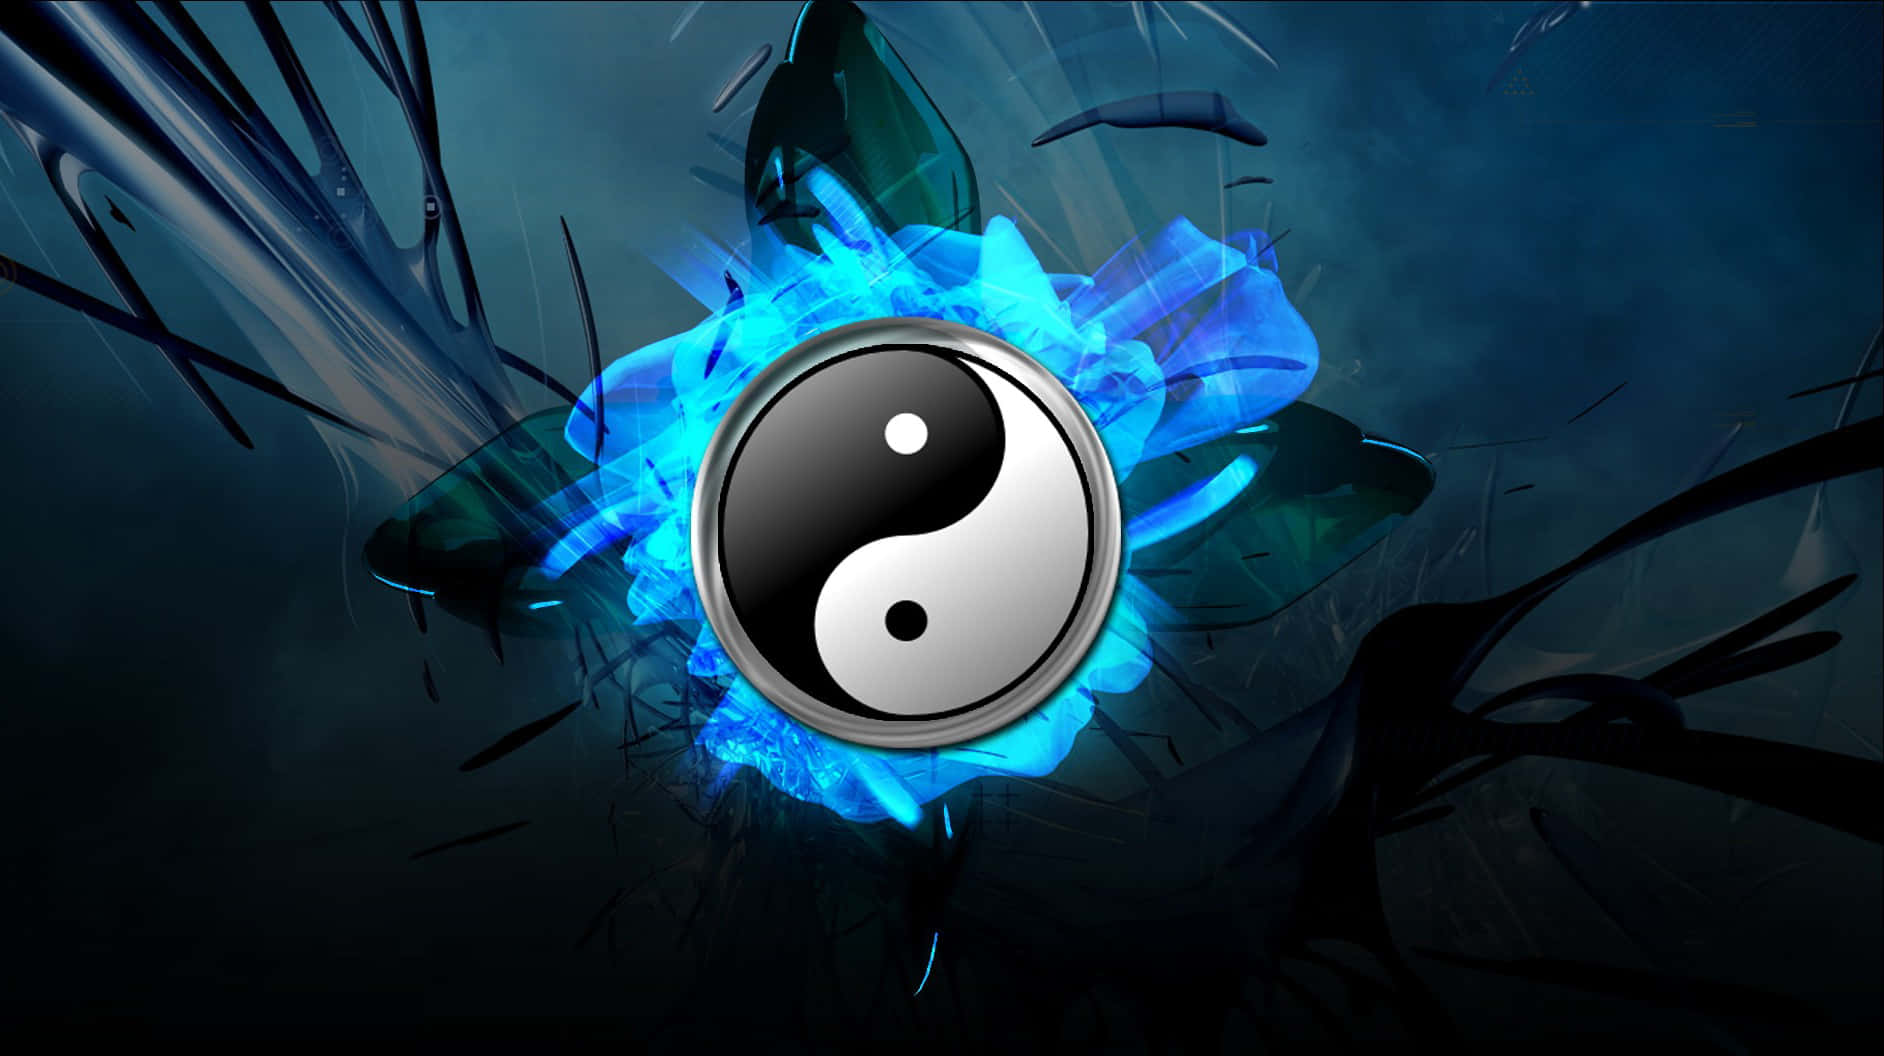 Achieve Harmony and Balance with Ying Yang